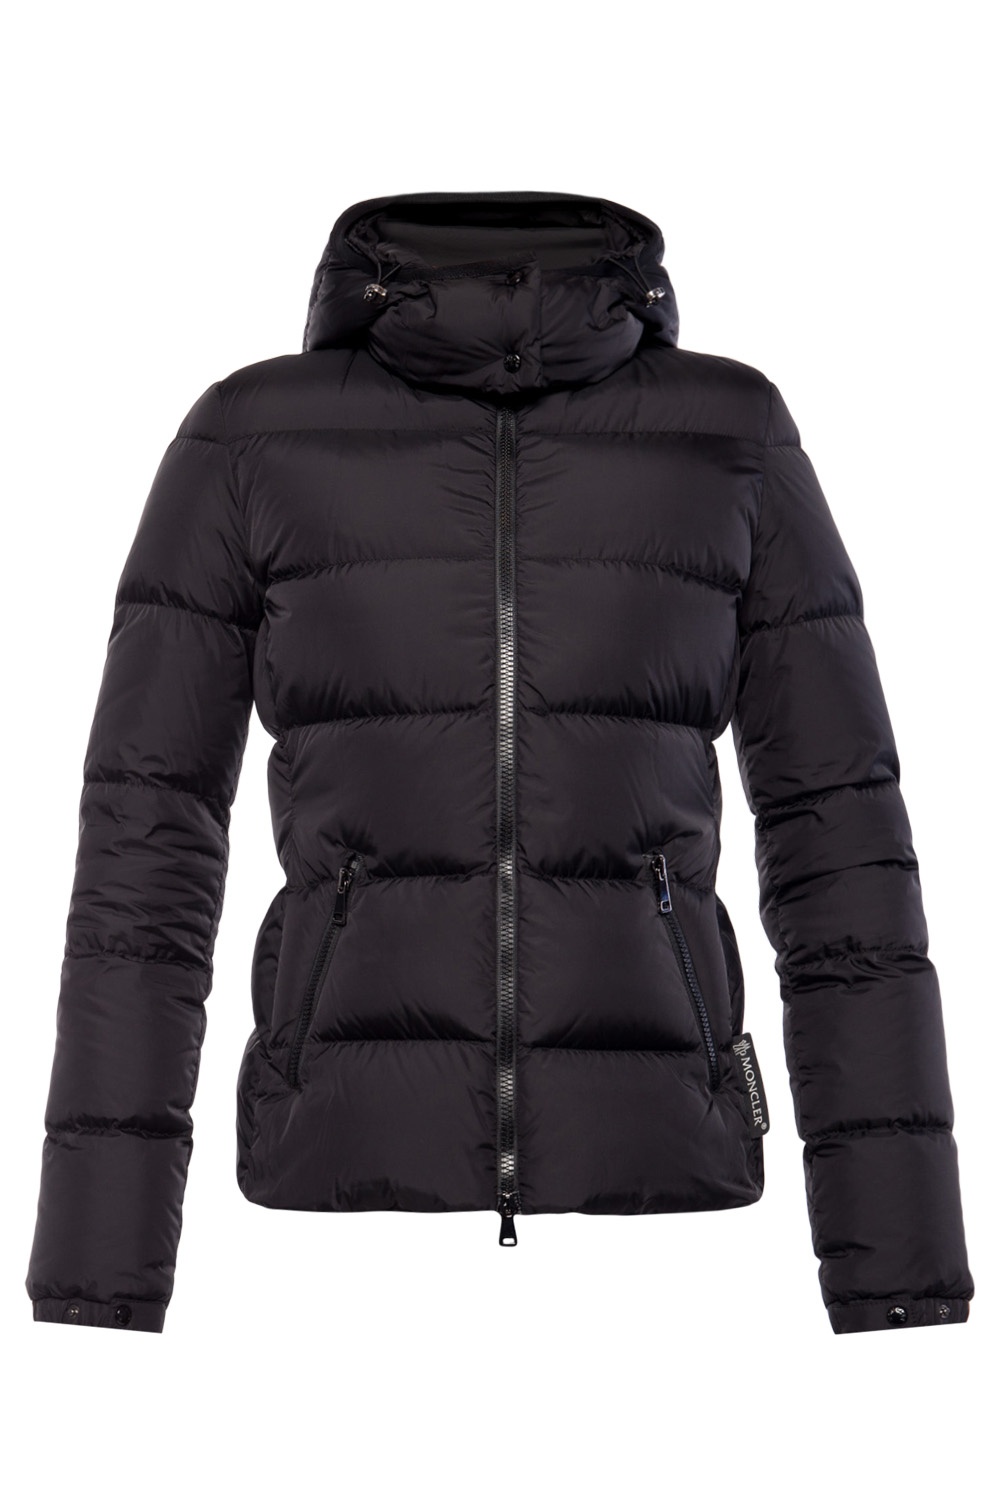 Black 'Don Giubbotto' quilted jacket Moncler - Vitkac GB